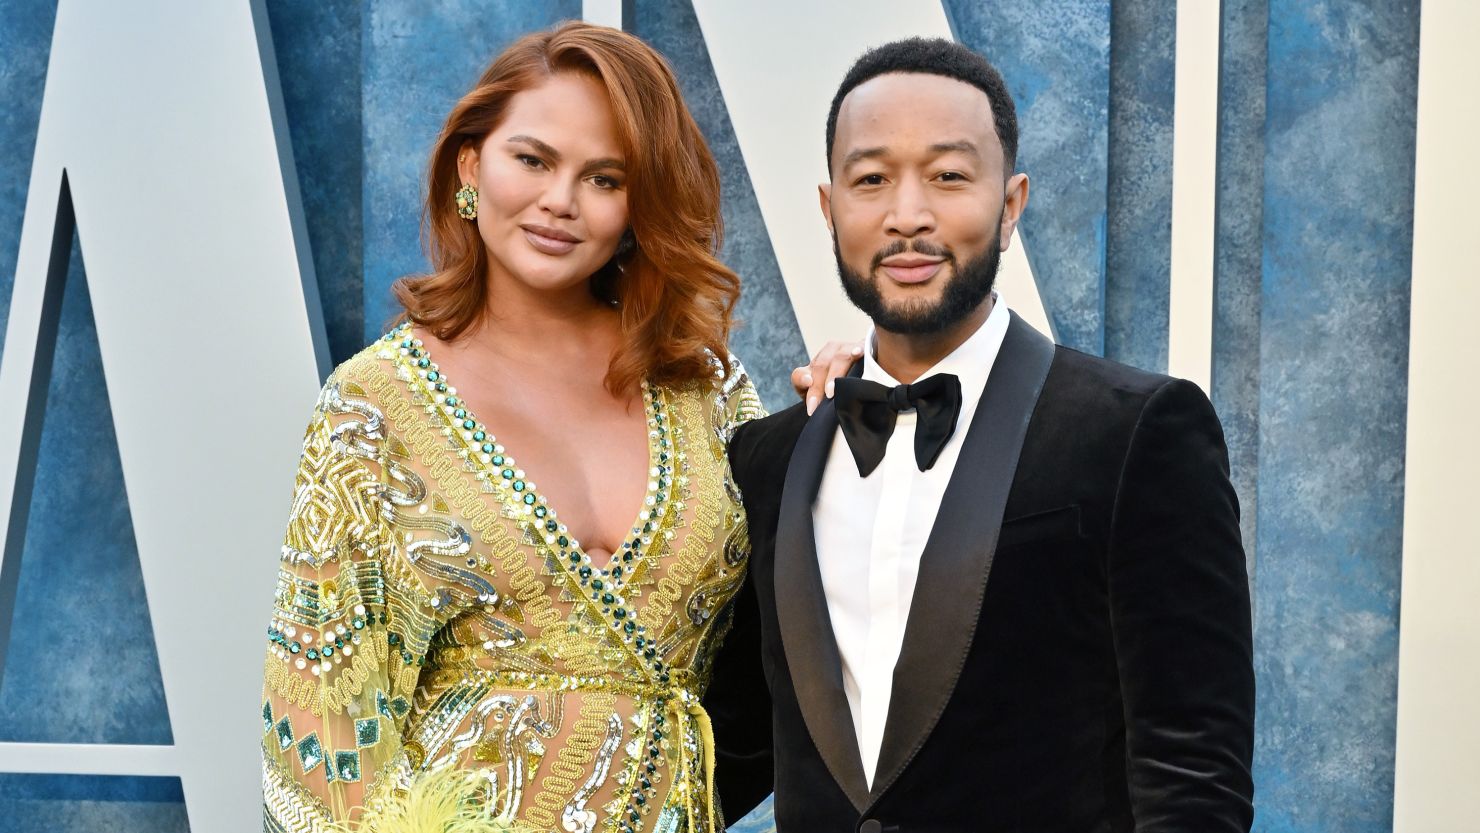 Chrissy Teigen and John Legend at the 2023 Vanity Fair Oscar Party in March in Beverly Hills, California.